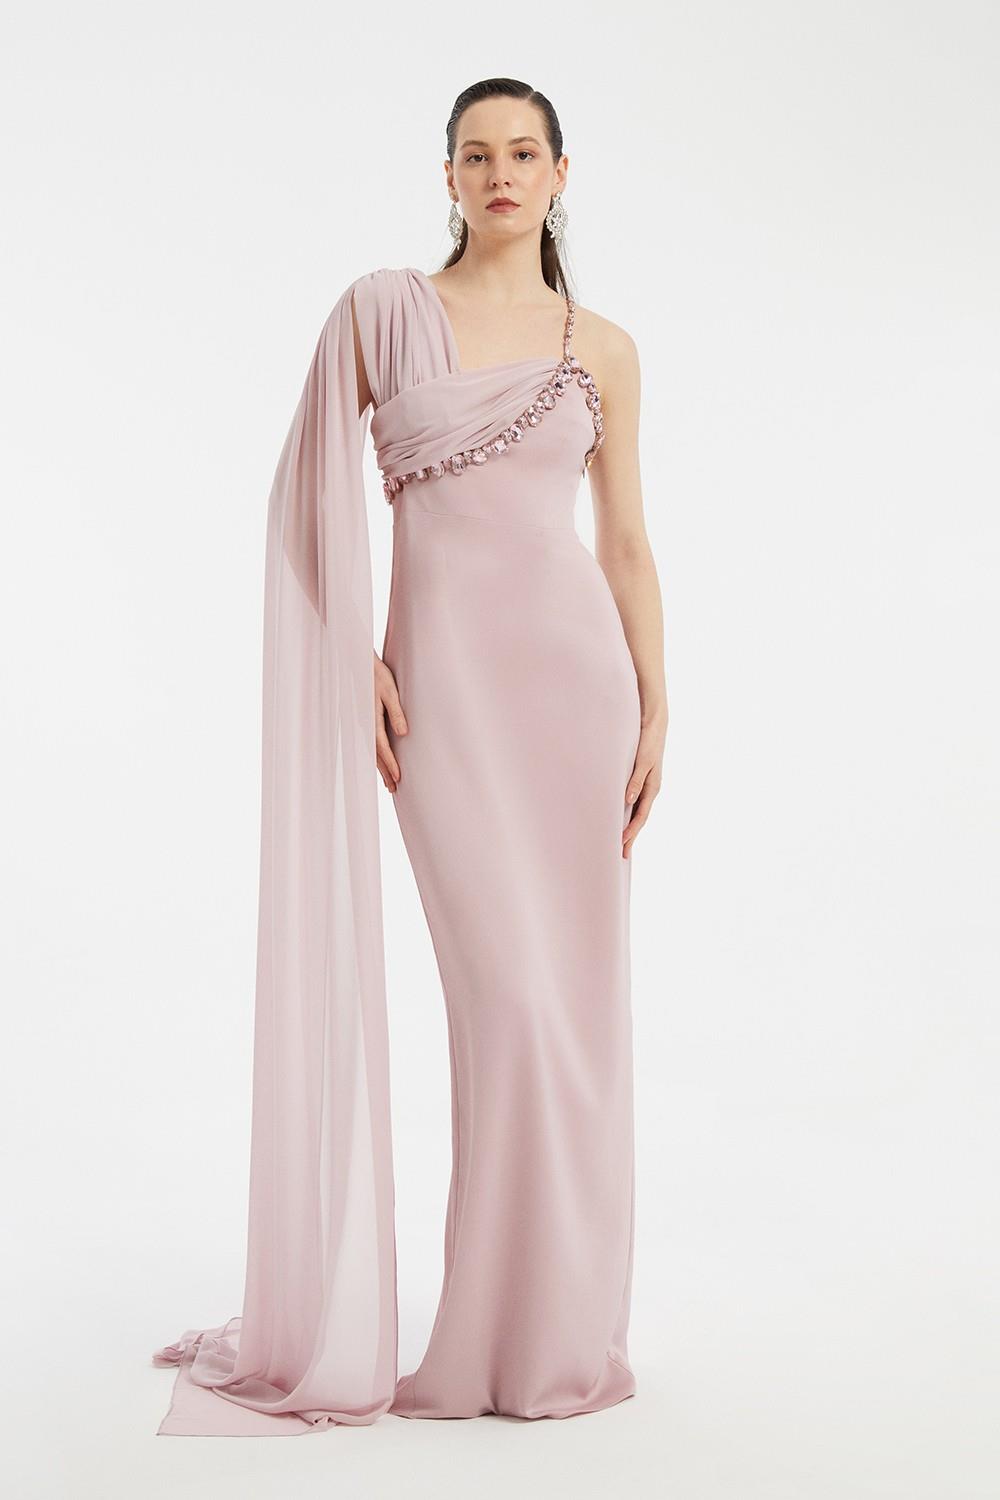 Embroidered Strappy Long Evening Dress